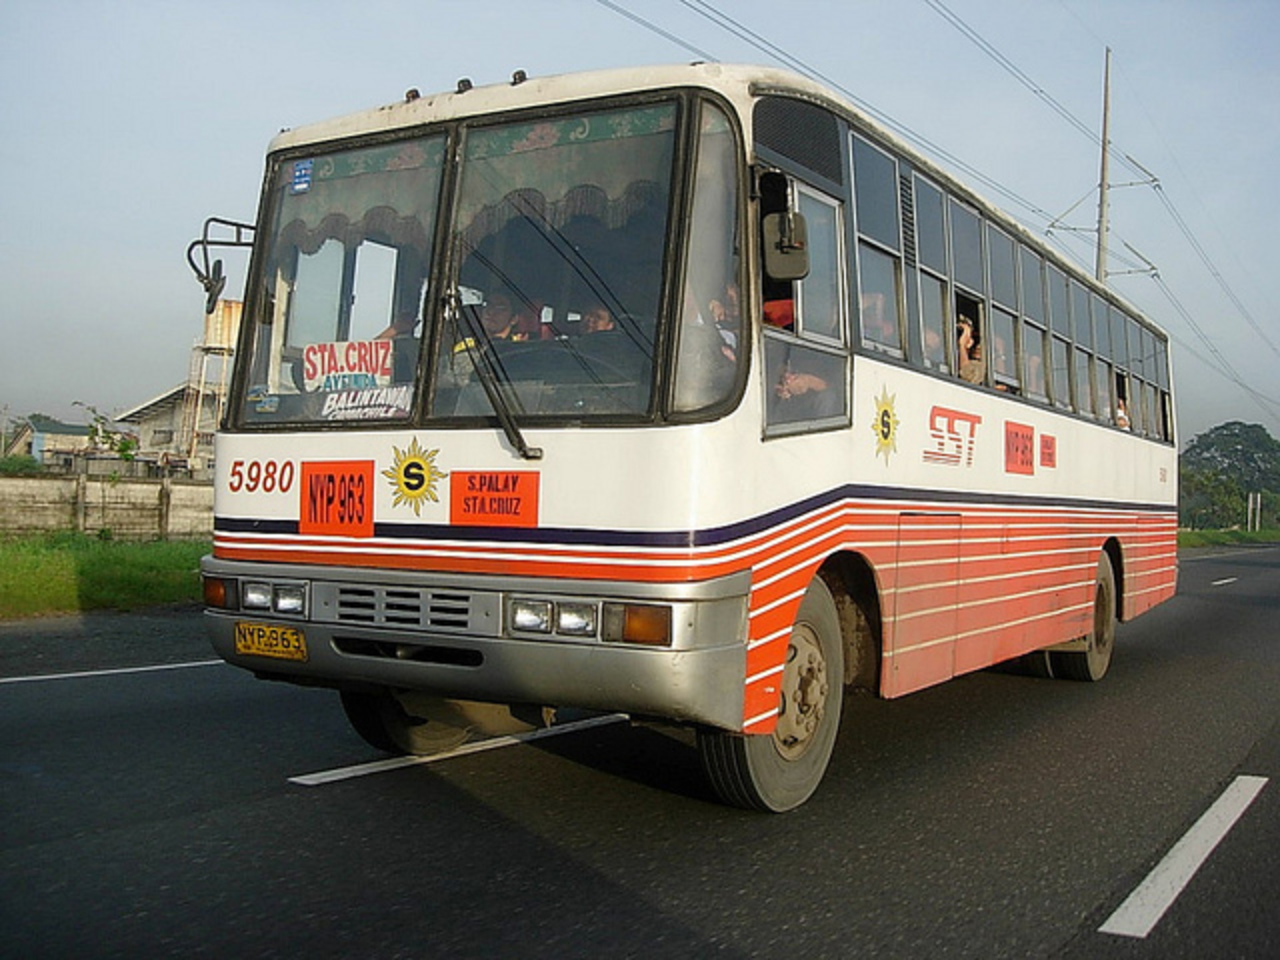 Nissan Diesel CKA 45 Photo Gallery: Photo #07 out of 10, Image ...